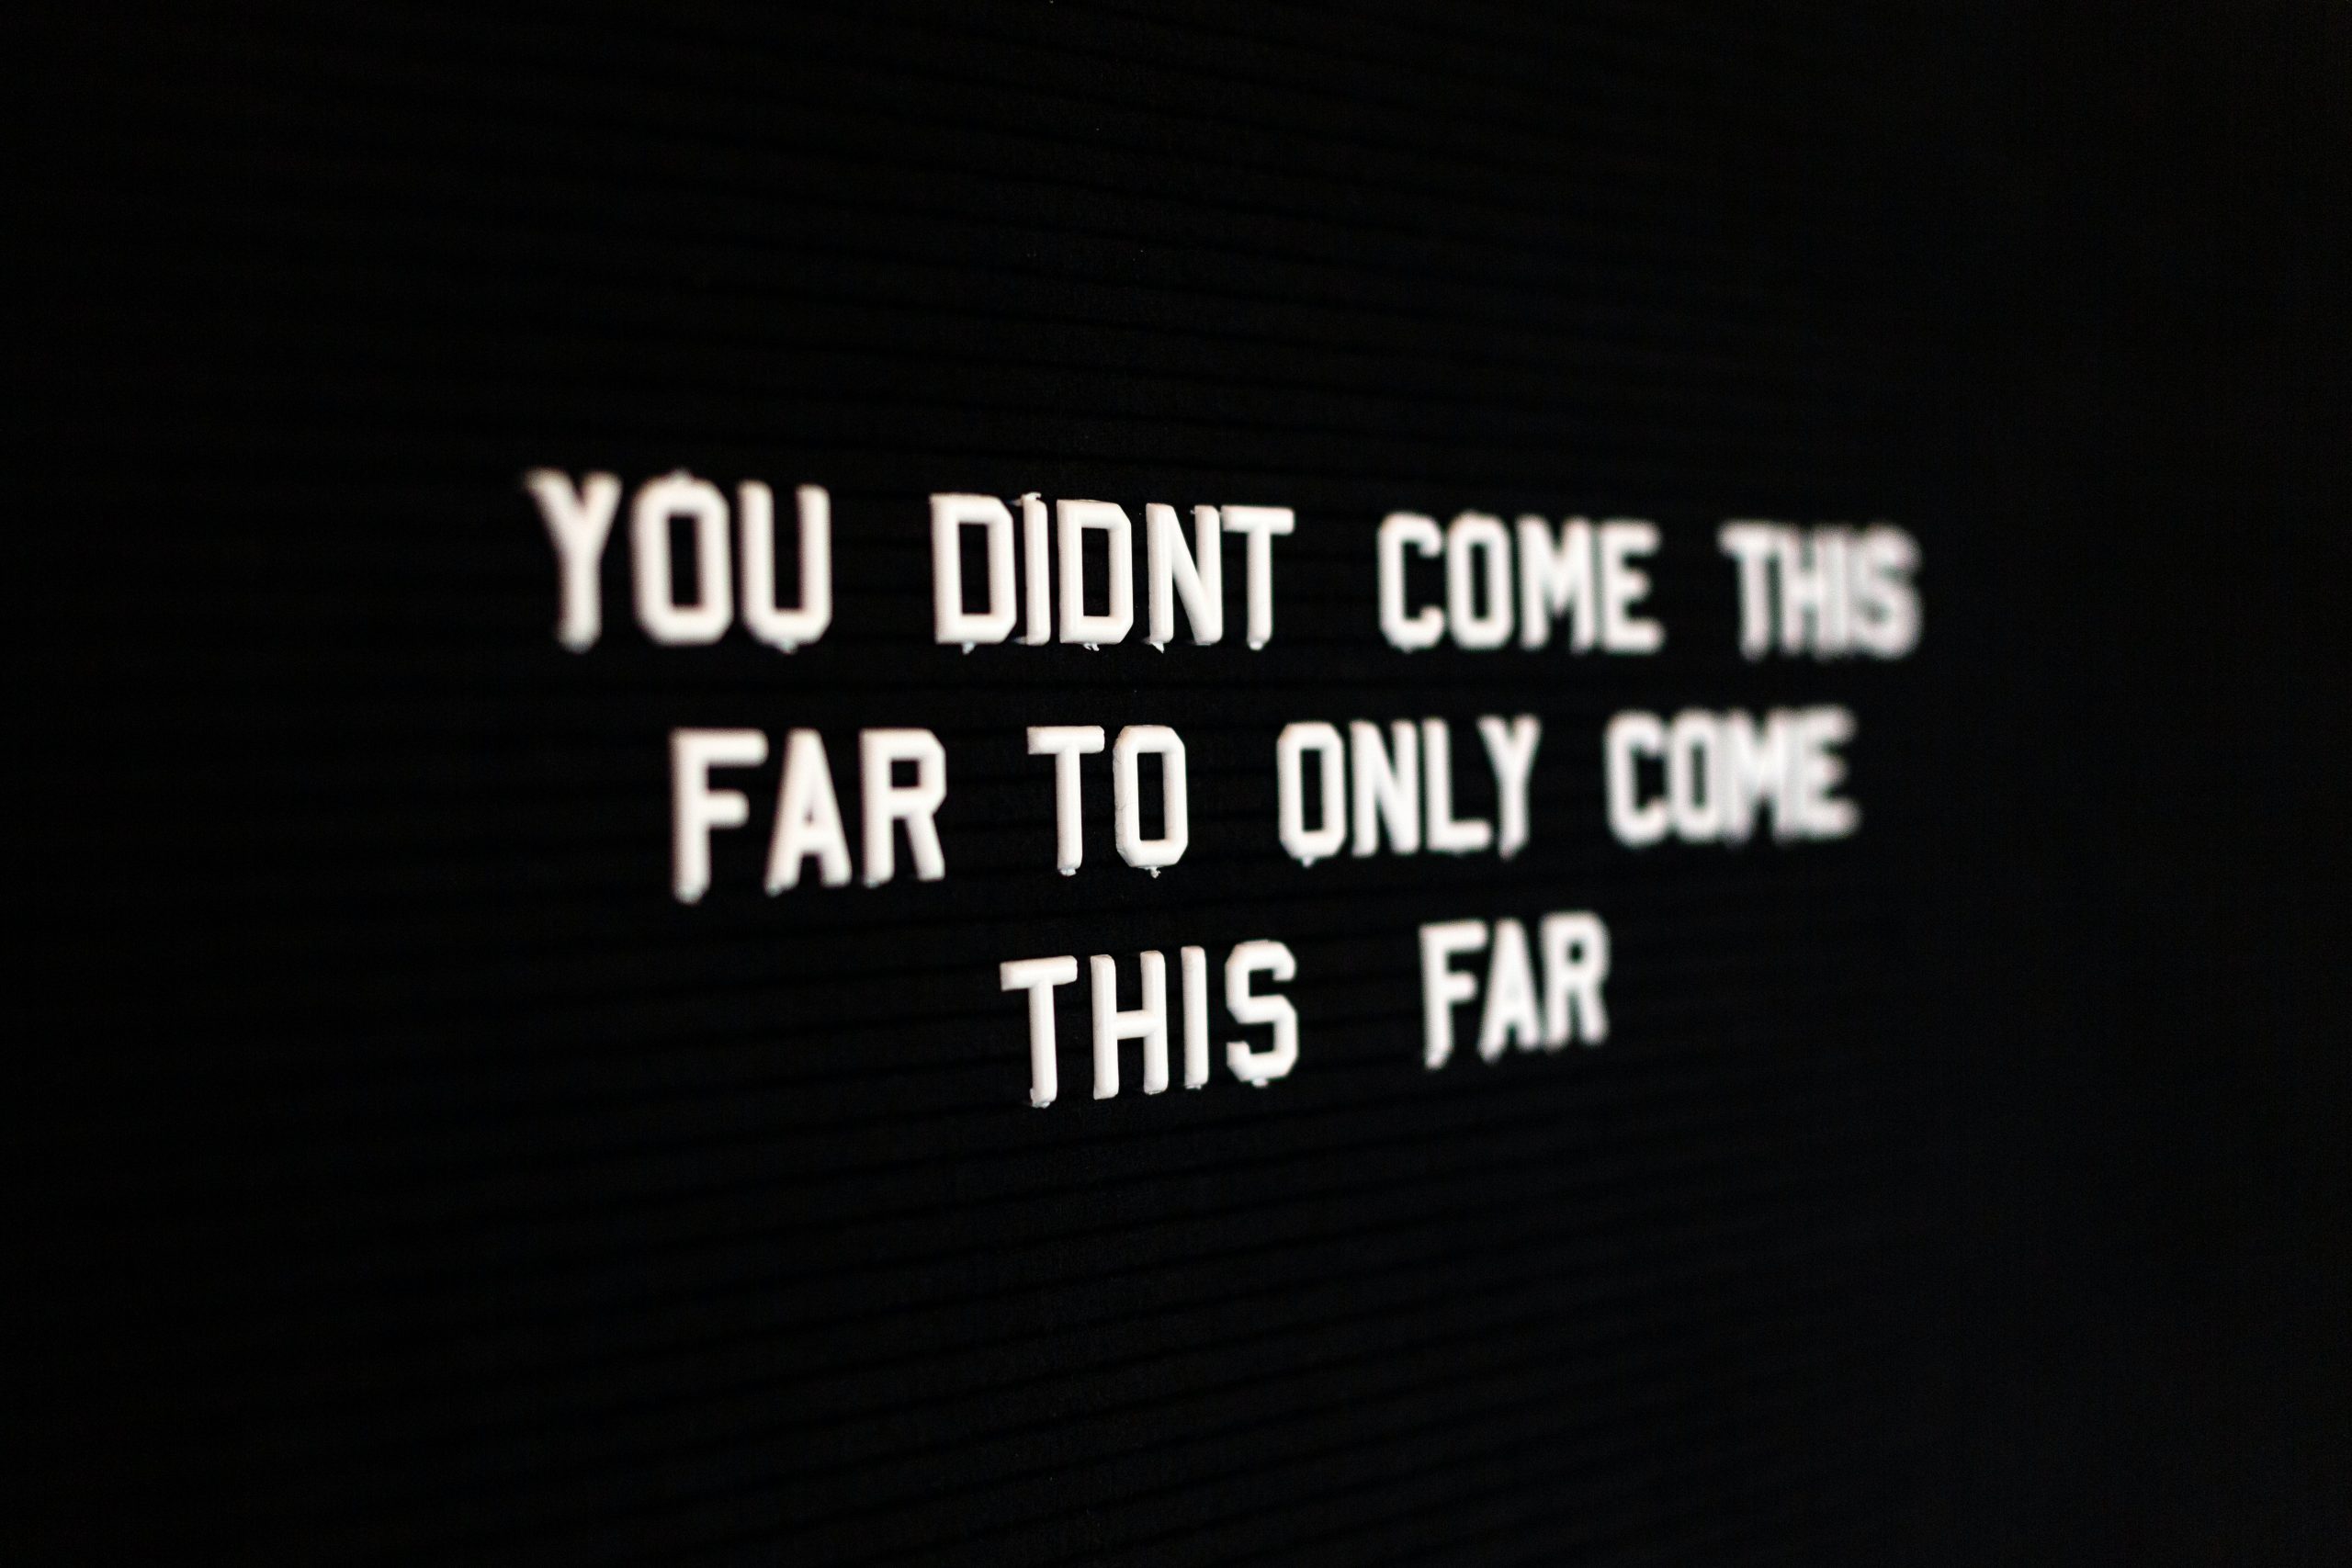 Sign that says, You did't come this far to only come this far.